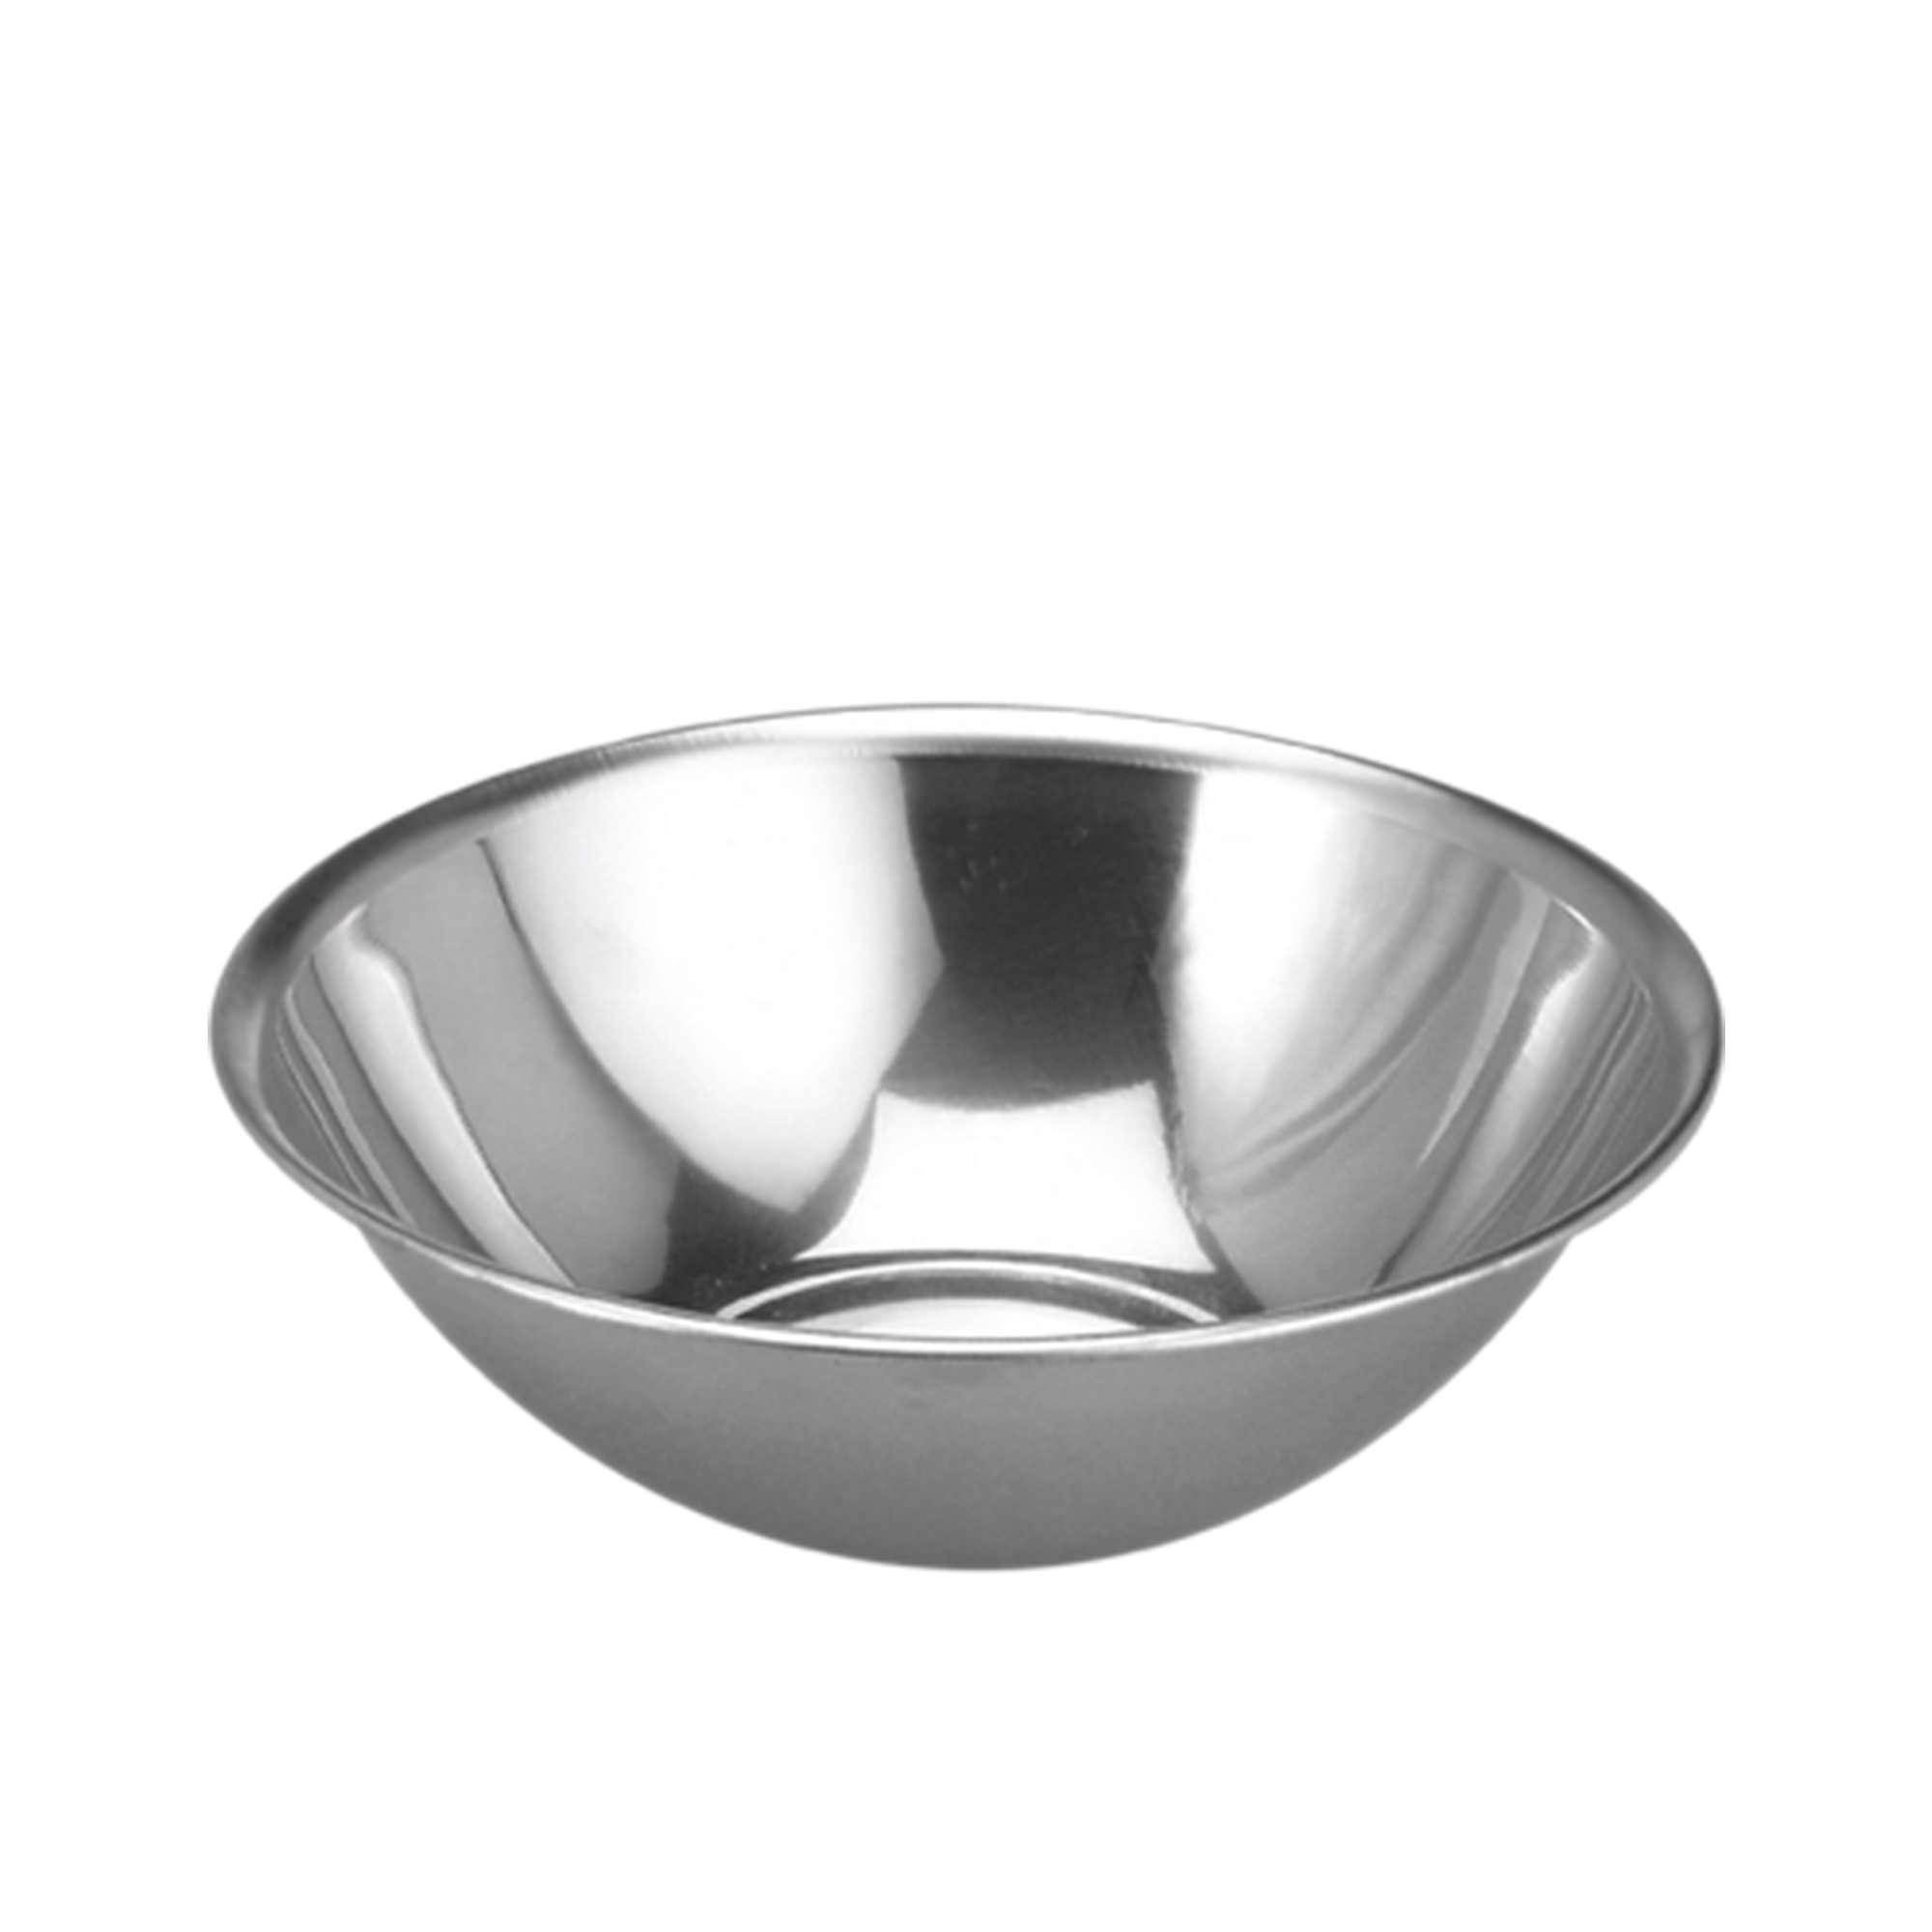 Chef Inox Stainless Steel Mixing Bowl 41cm - 10L Image 1